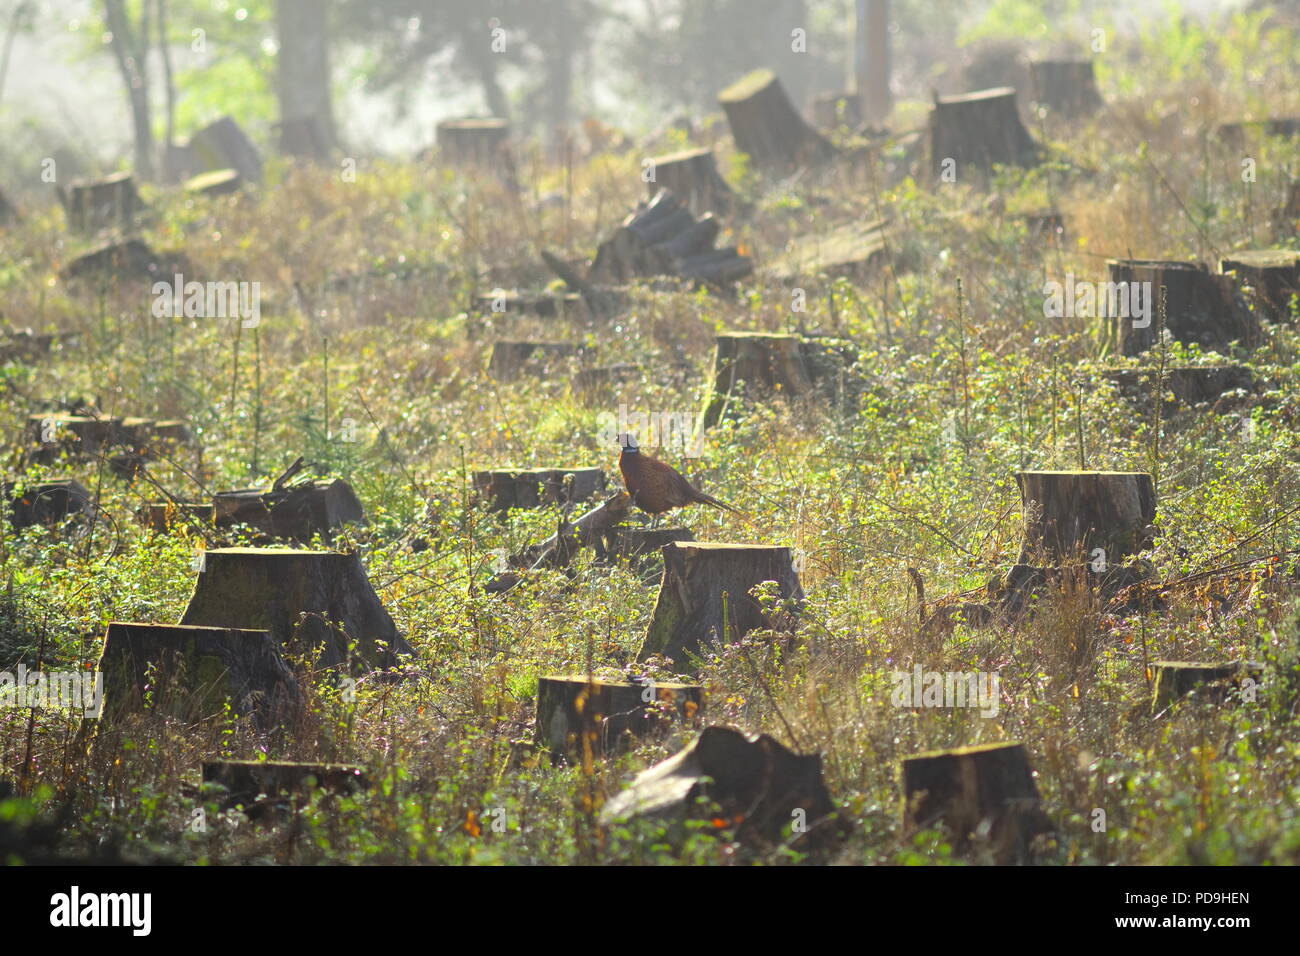 Lonely wild pheasant in a forest with cut down trees in East Devon Stock Photo